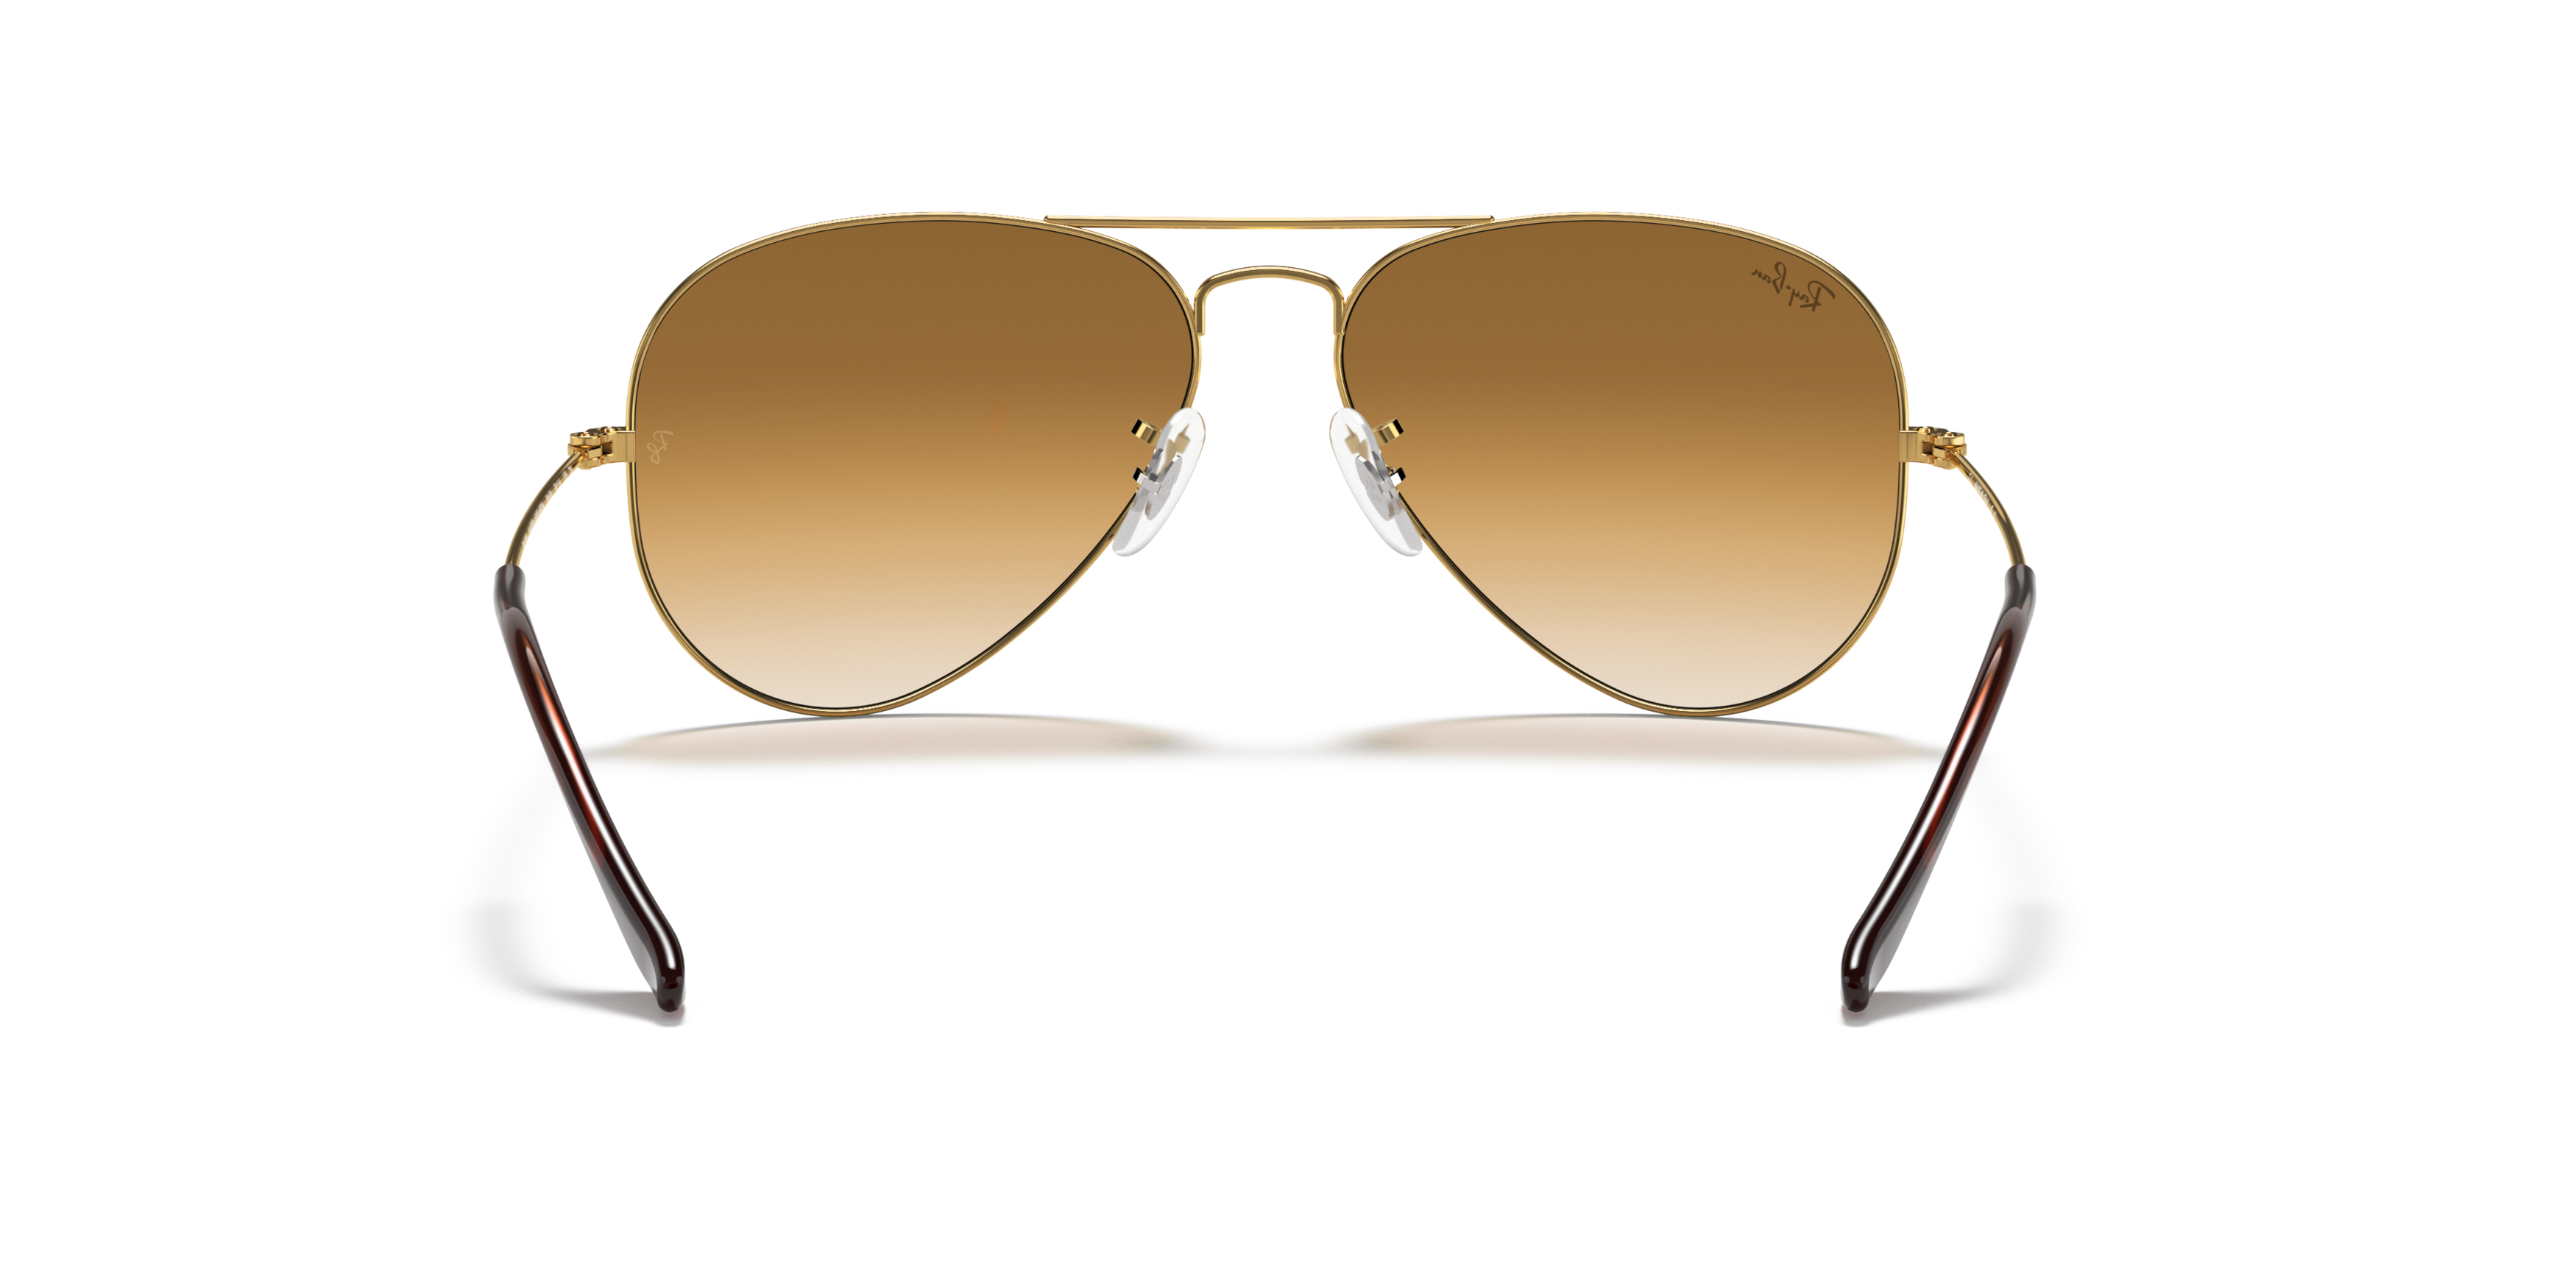 [products.image.detail02] Ray-Ban Aviator Gradient RB3025 001/51